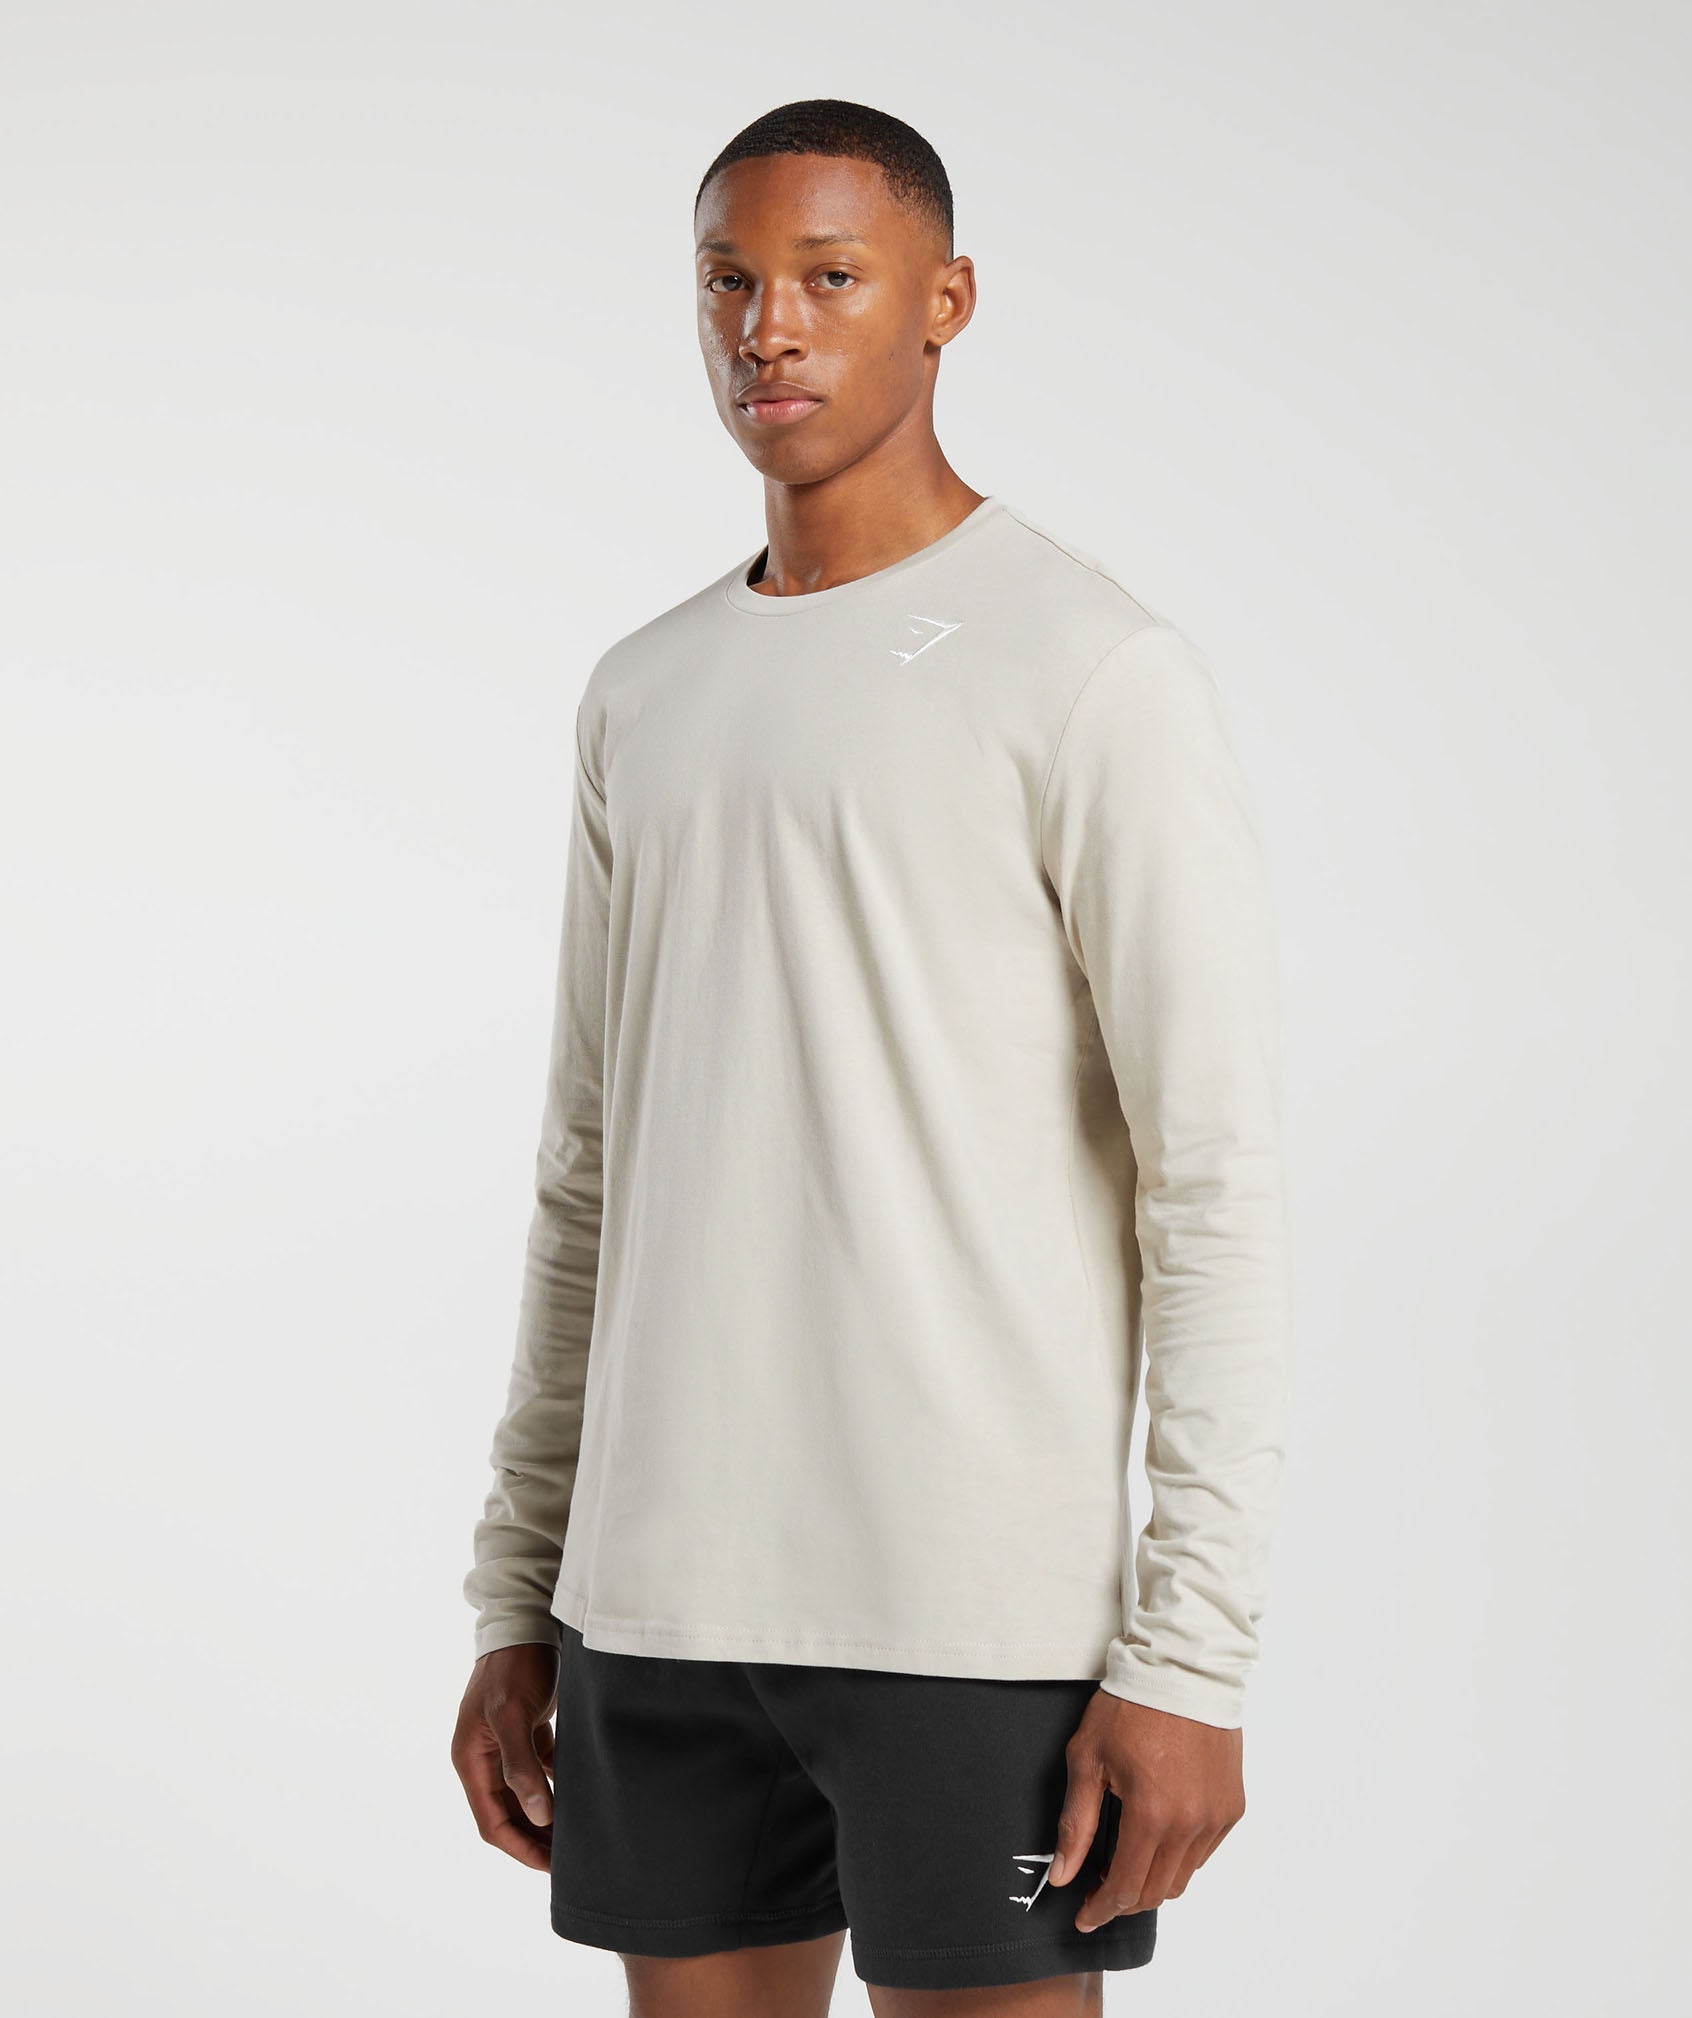 Crest Long Sleeve T-Shirt in Pebble Grey - view 3